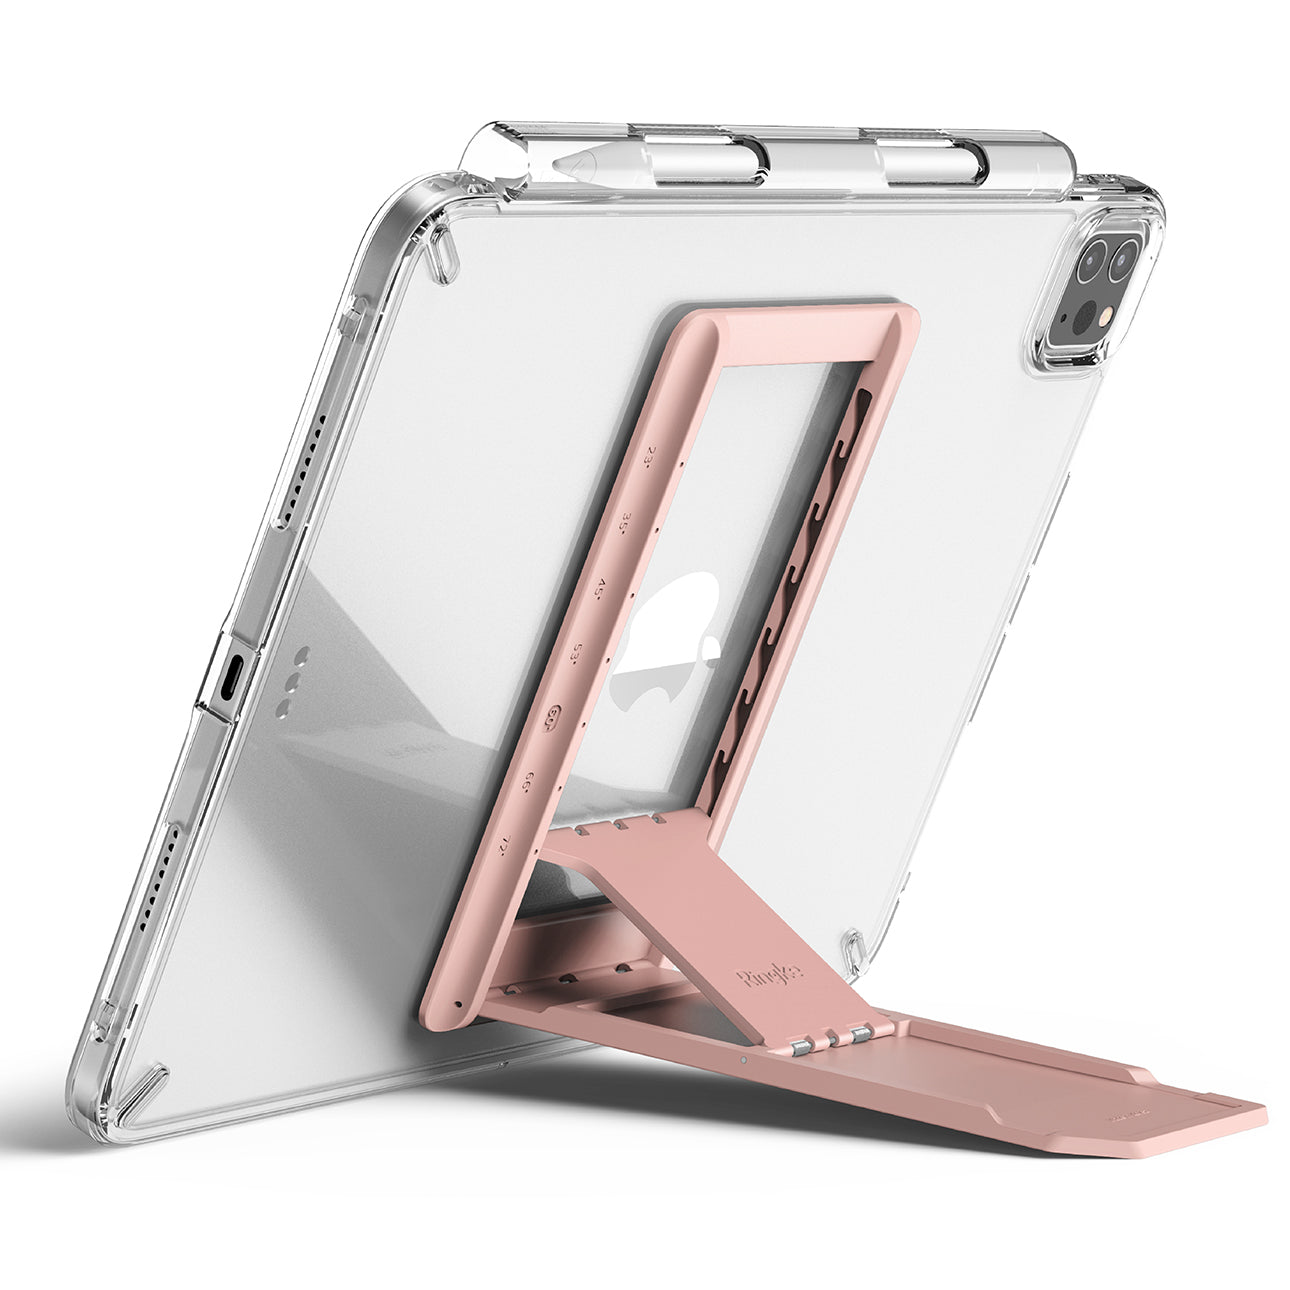 Outstanding | Tablet Stand